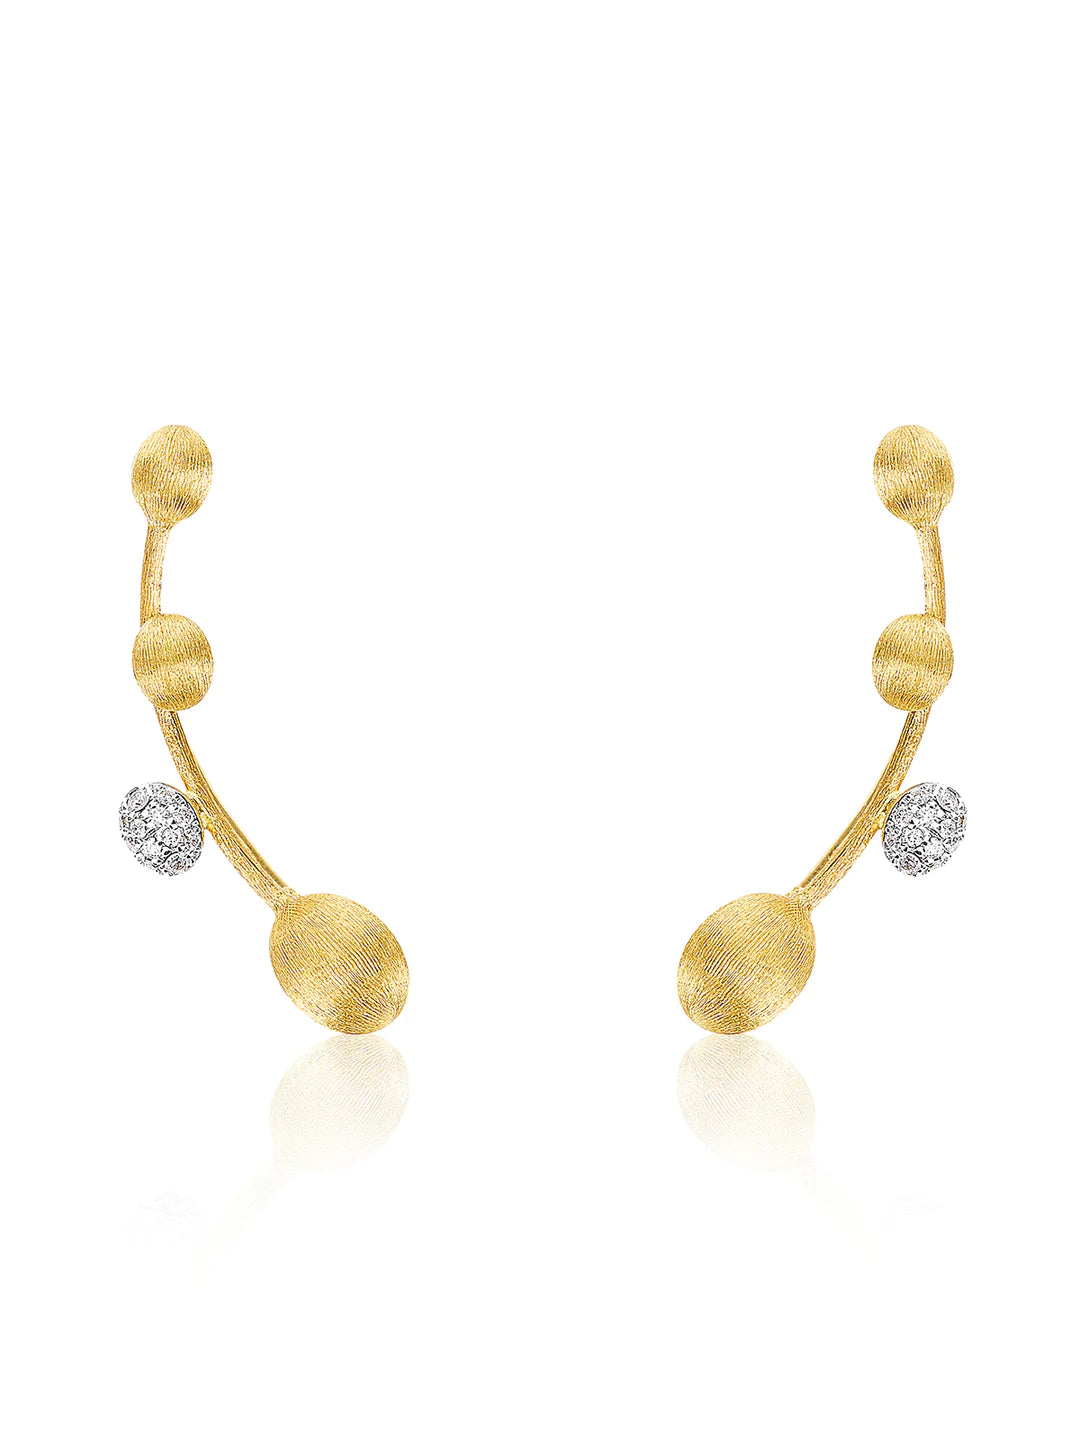 "ÉLITE" GOLD AND DIAMONDS TWIG-SHAPED EARRINGS